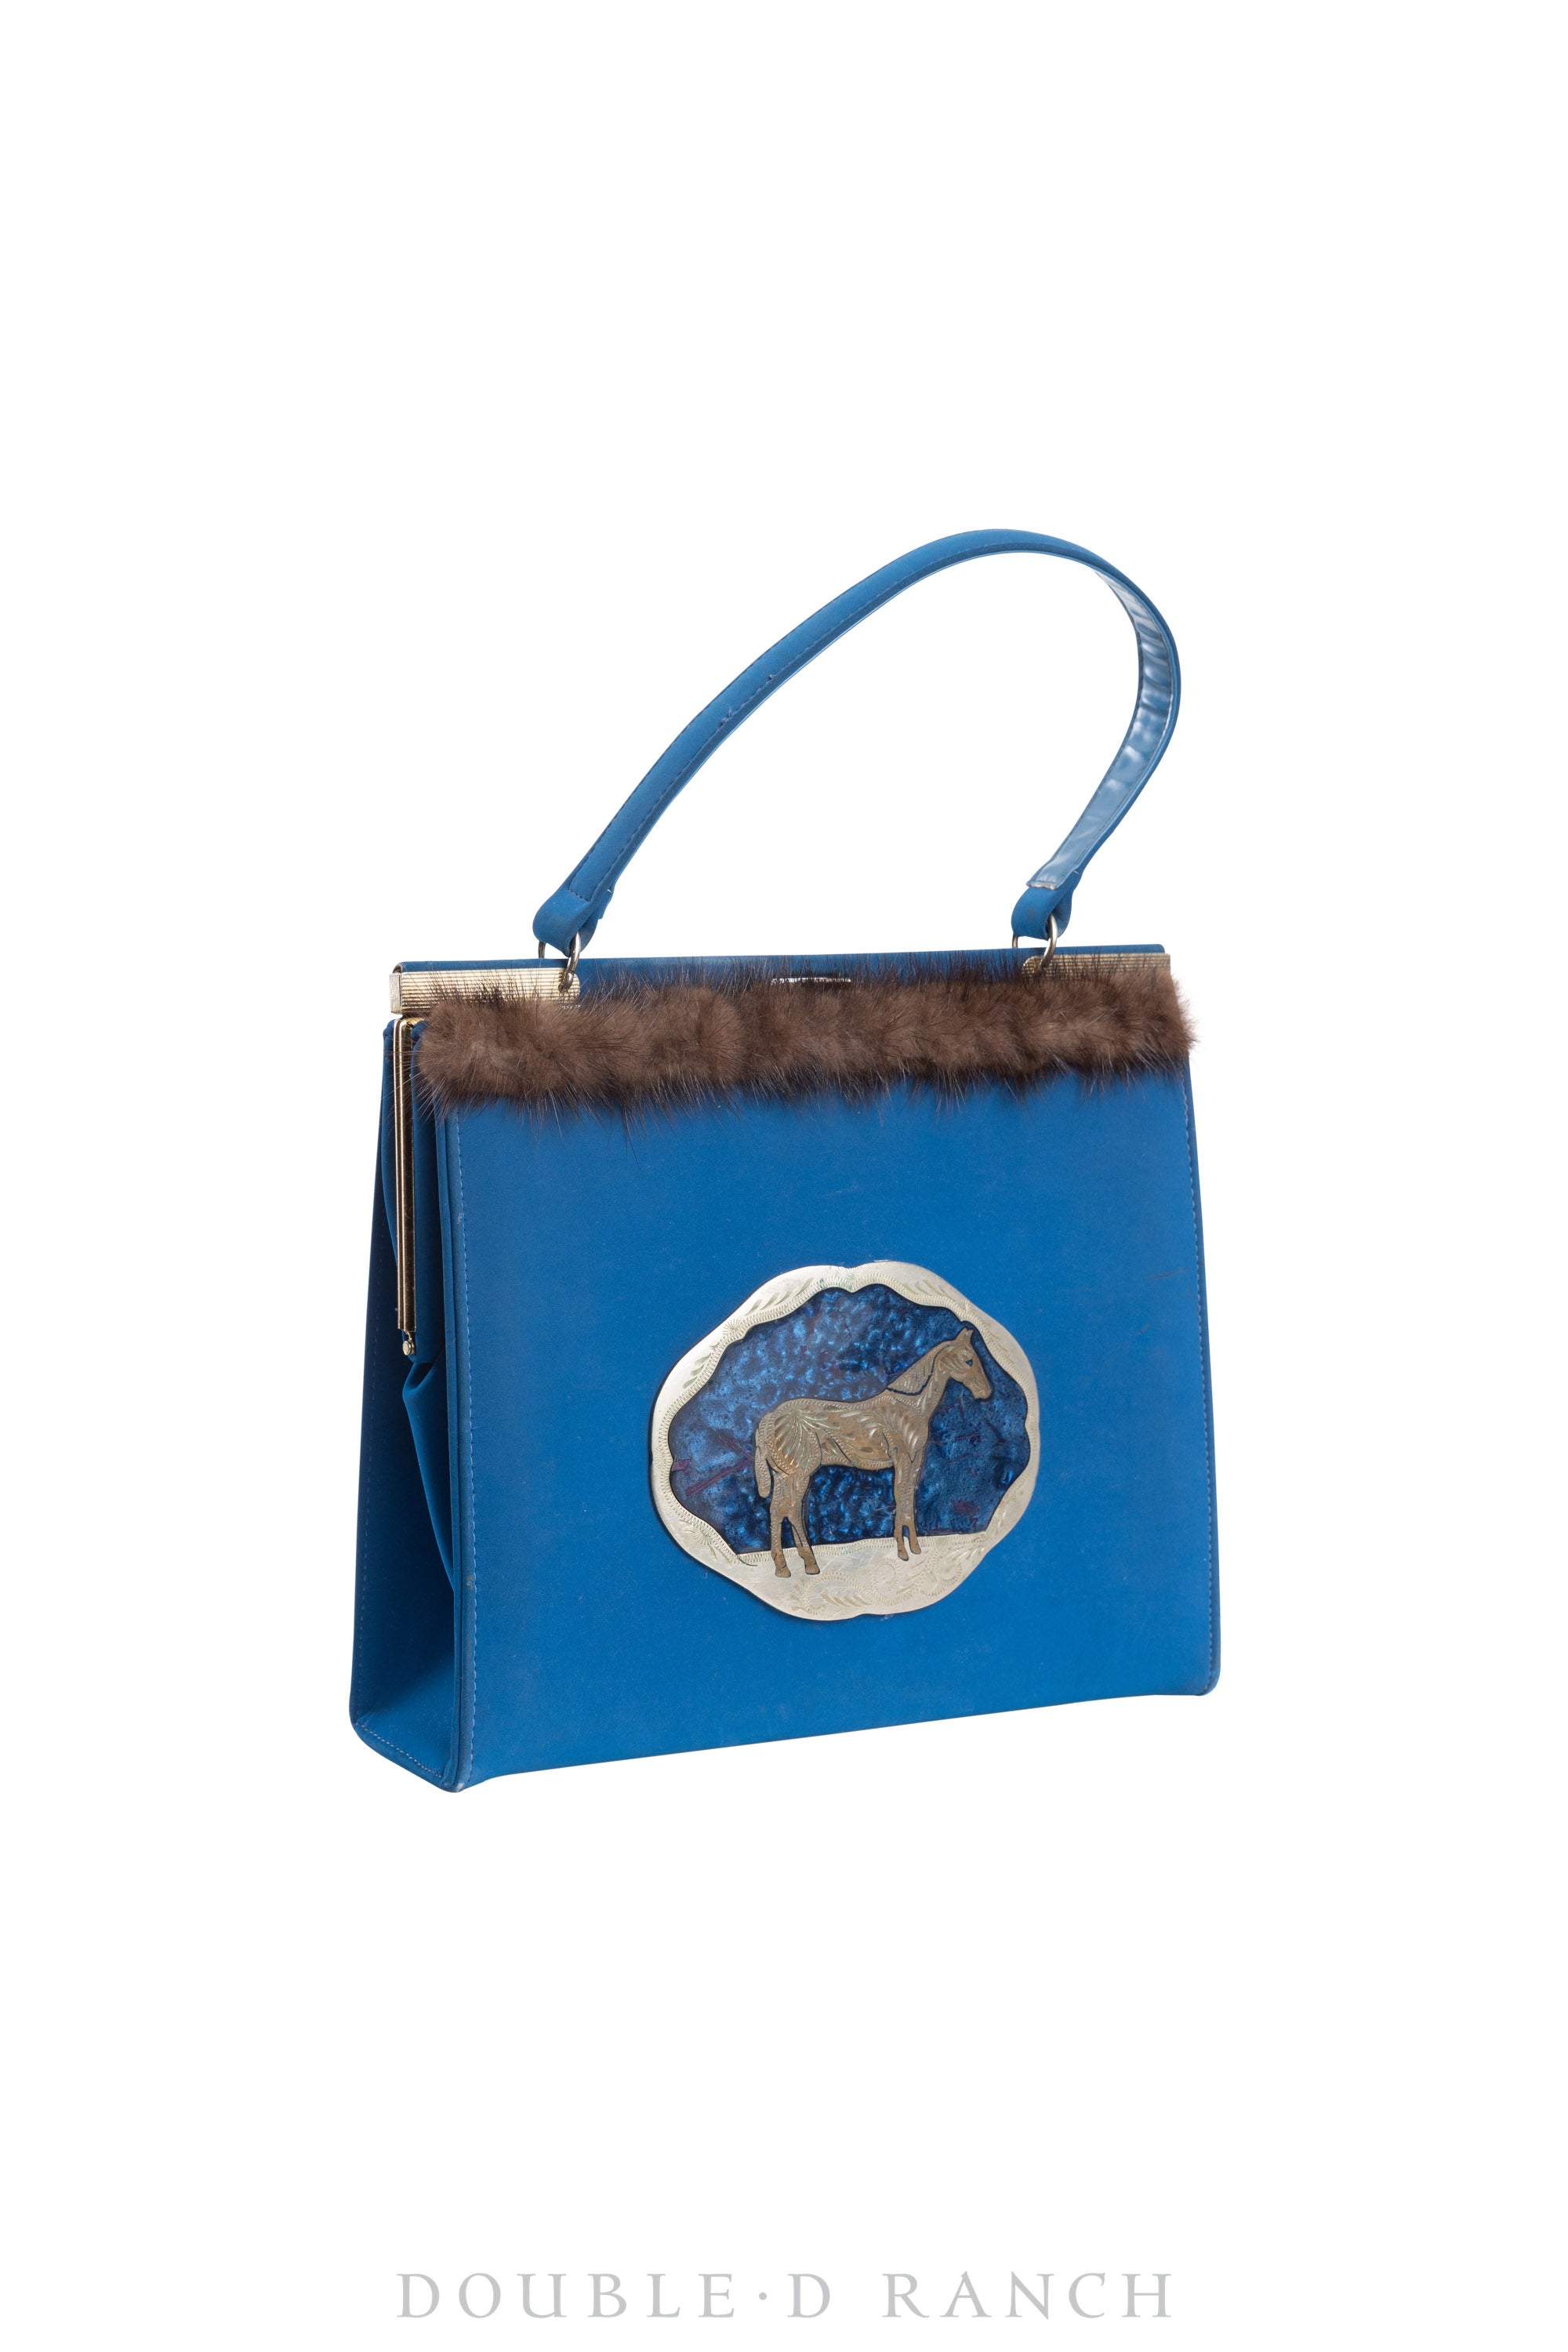 Bag, Silver Label,  Blue Leather with Horse Buckle, Numbered Edition, Repurposed, 1274